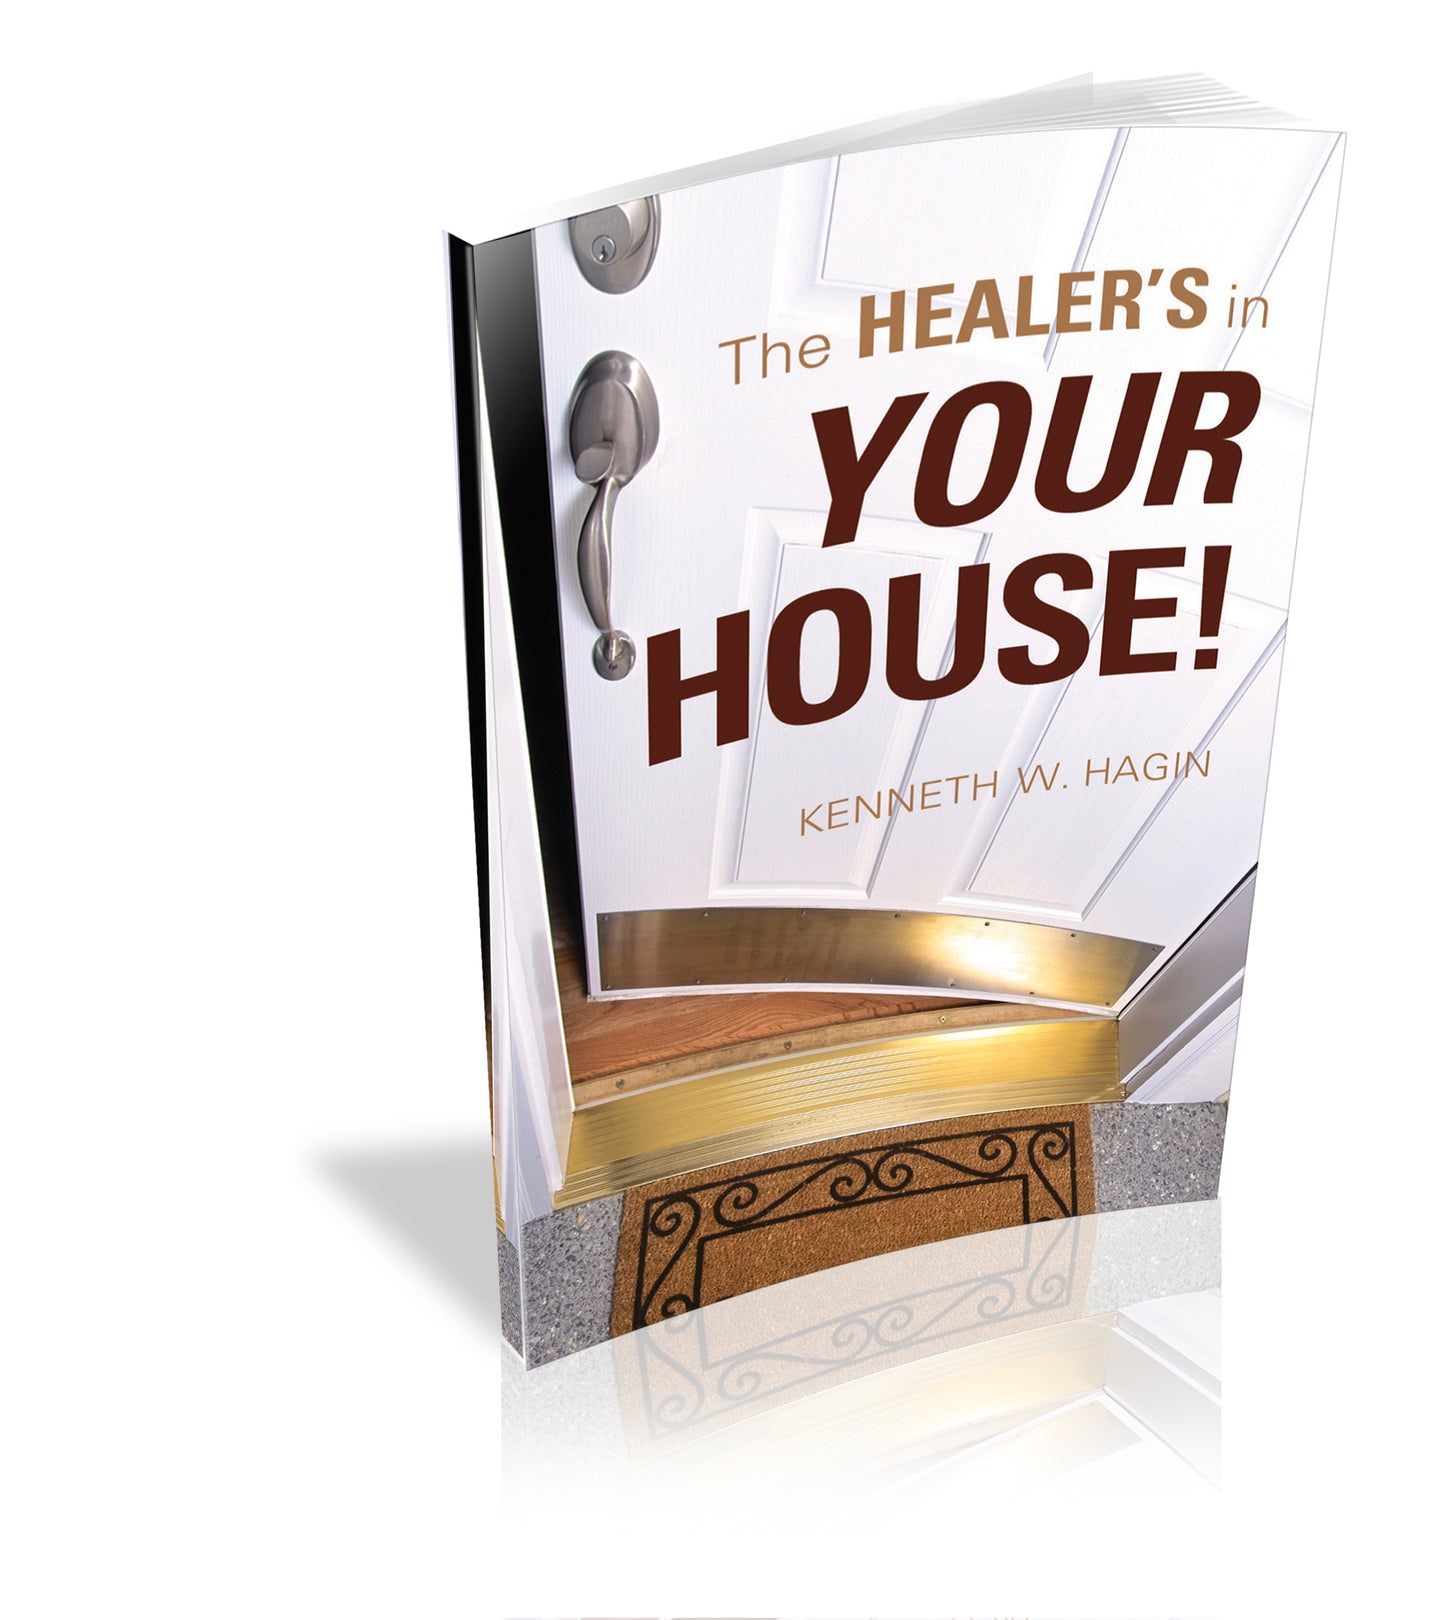 The Healer’s in Your House!